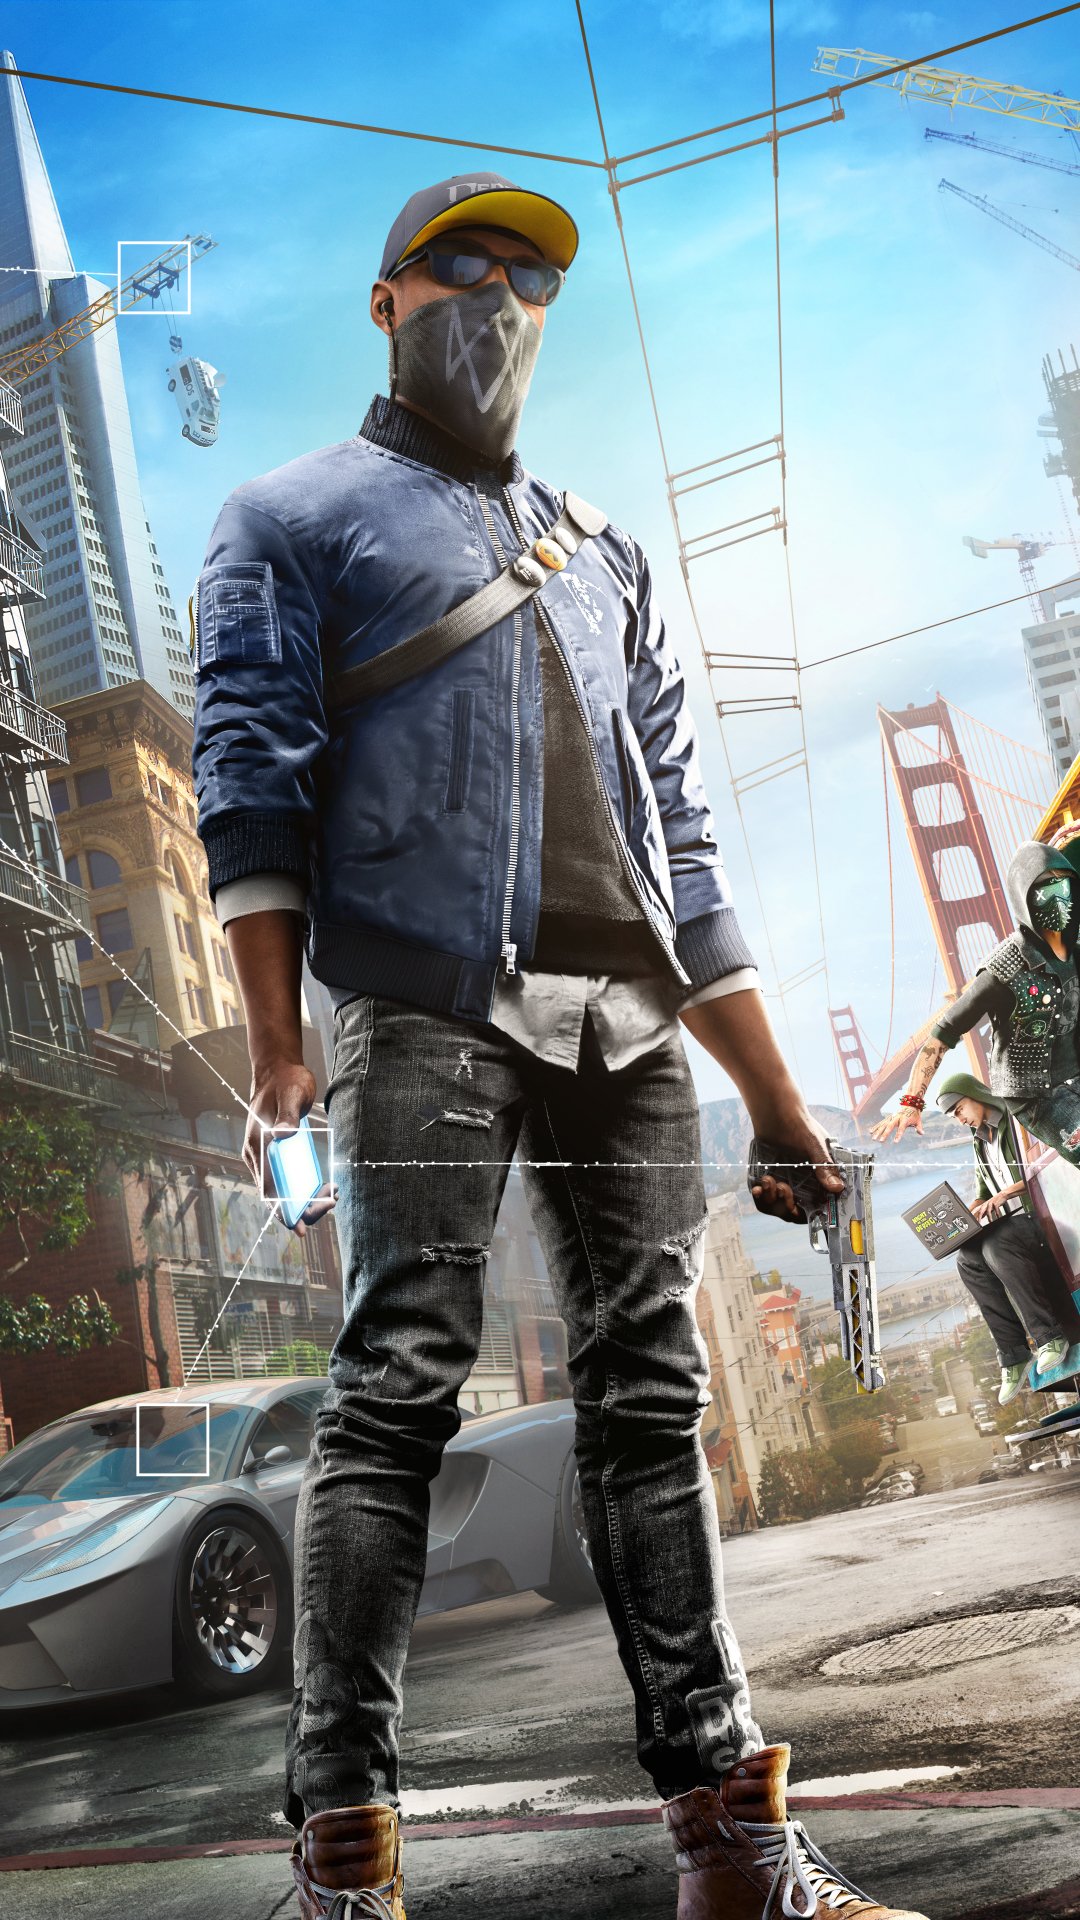 1080x1920   Video GameWatch Dogs 2   Wallpaper ID 652941